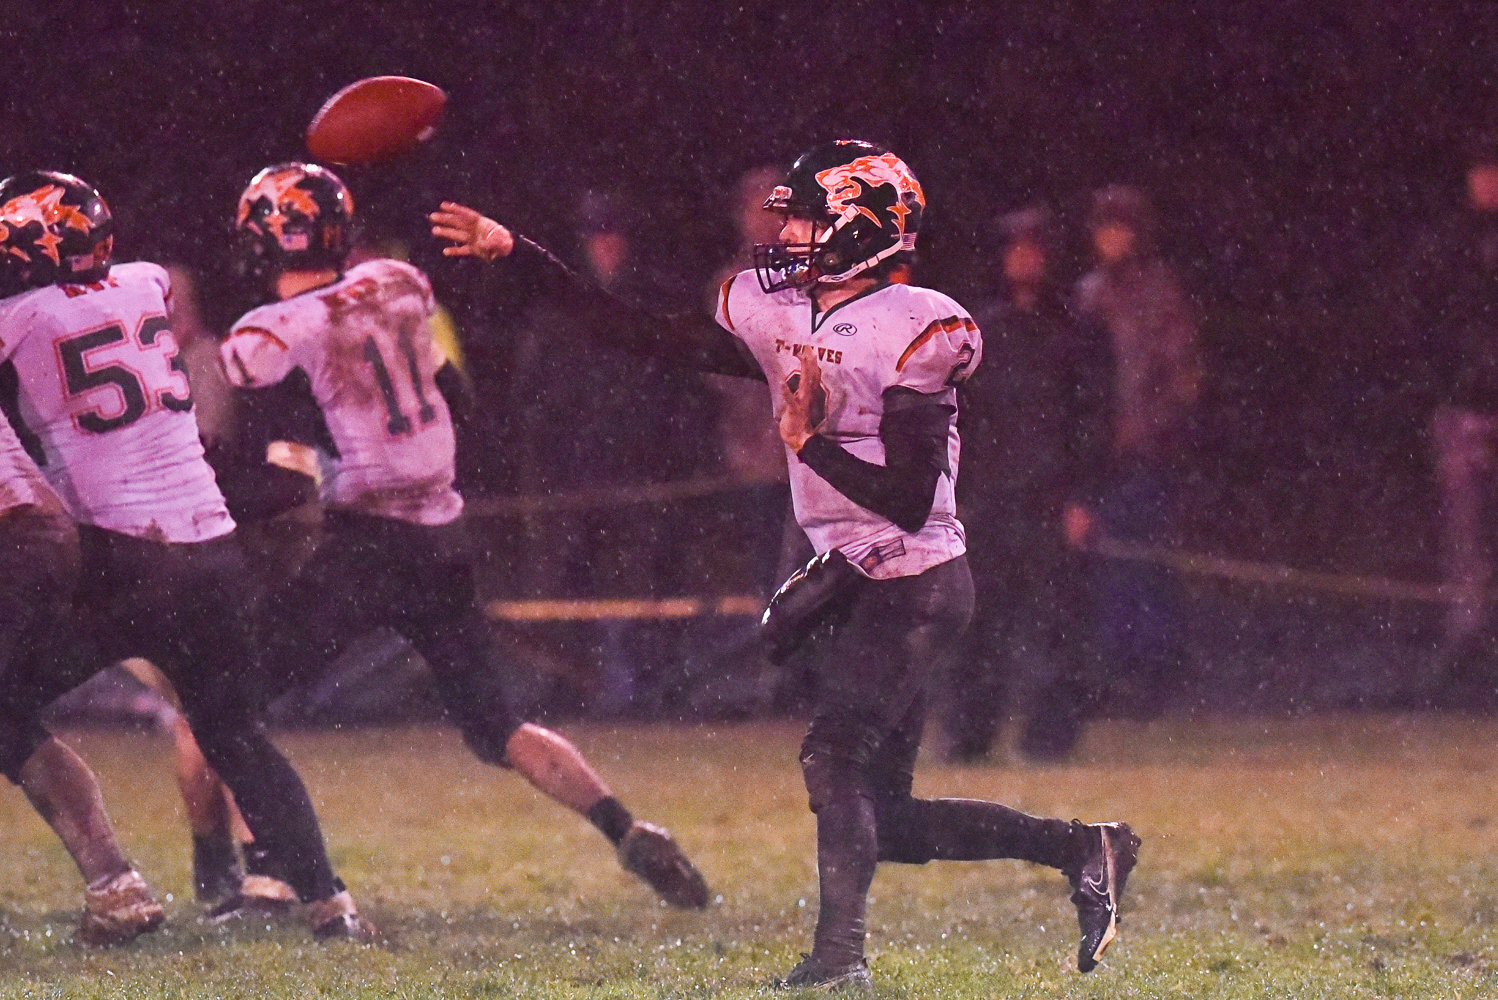 MWP quarterback Judah Kelly lets loose on a throw during the T-Wolves' 26-8 loss at Onalaska in a district crossover on Nov. 4.